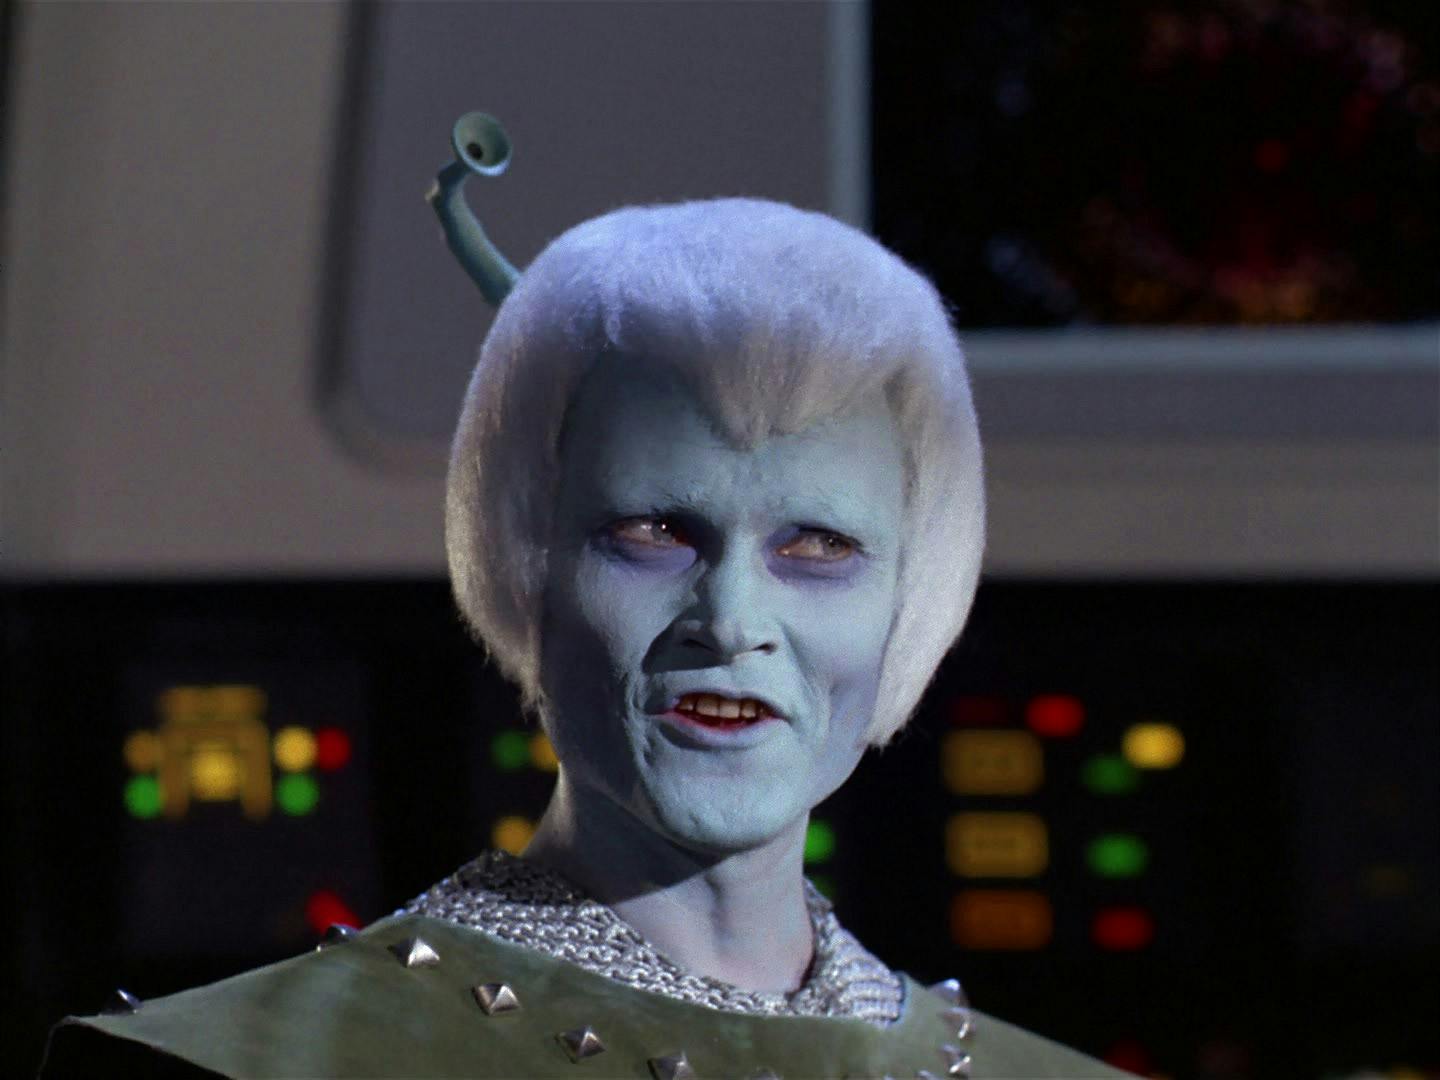 Thelev, an Orion posing as an Andorian, in order to infiltrate the Babel conference is exposed after the murder of a Tellarite ambassador and damage to his faux antennae, stands aboard the Enterprise bridge witnesses his ship on the viewfinder in 'Journey to Babel'